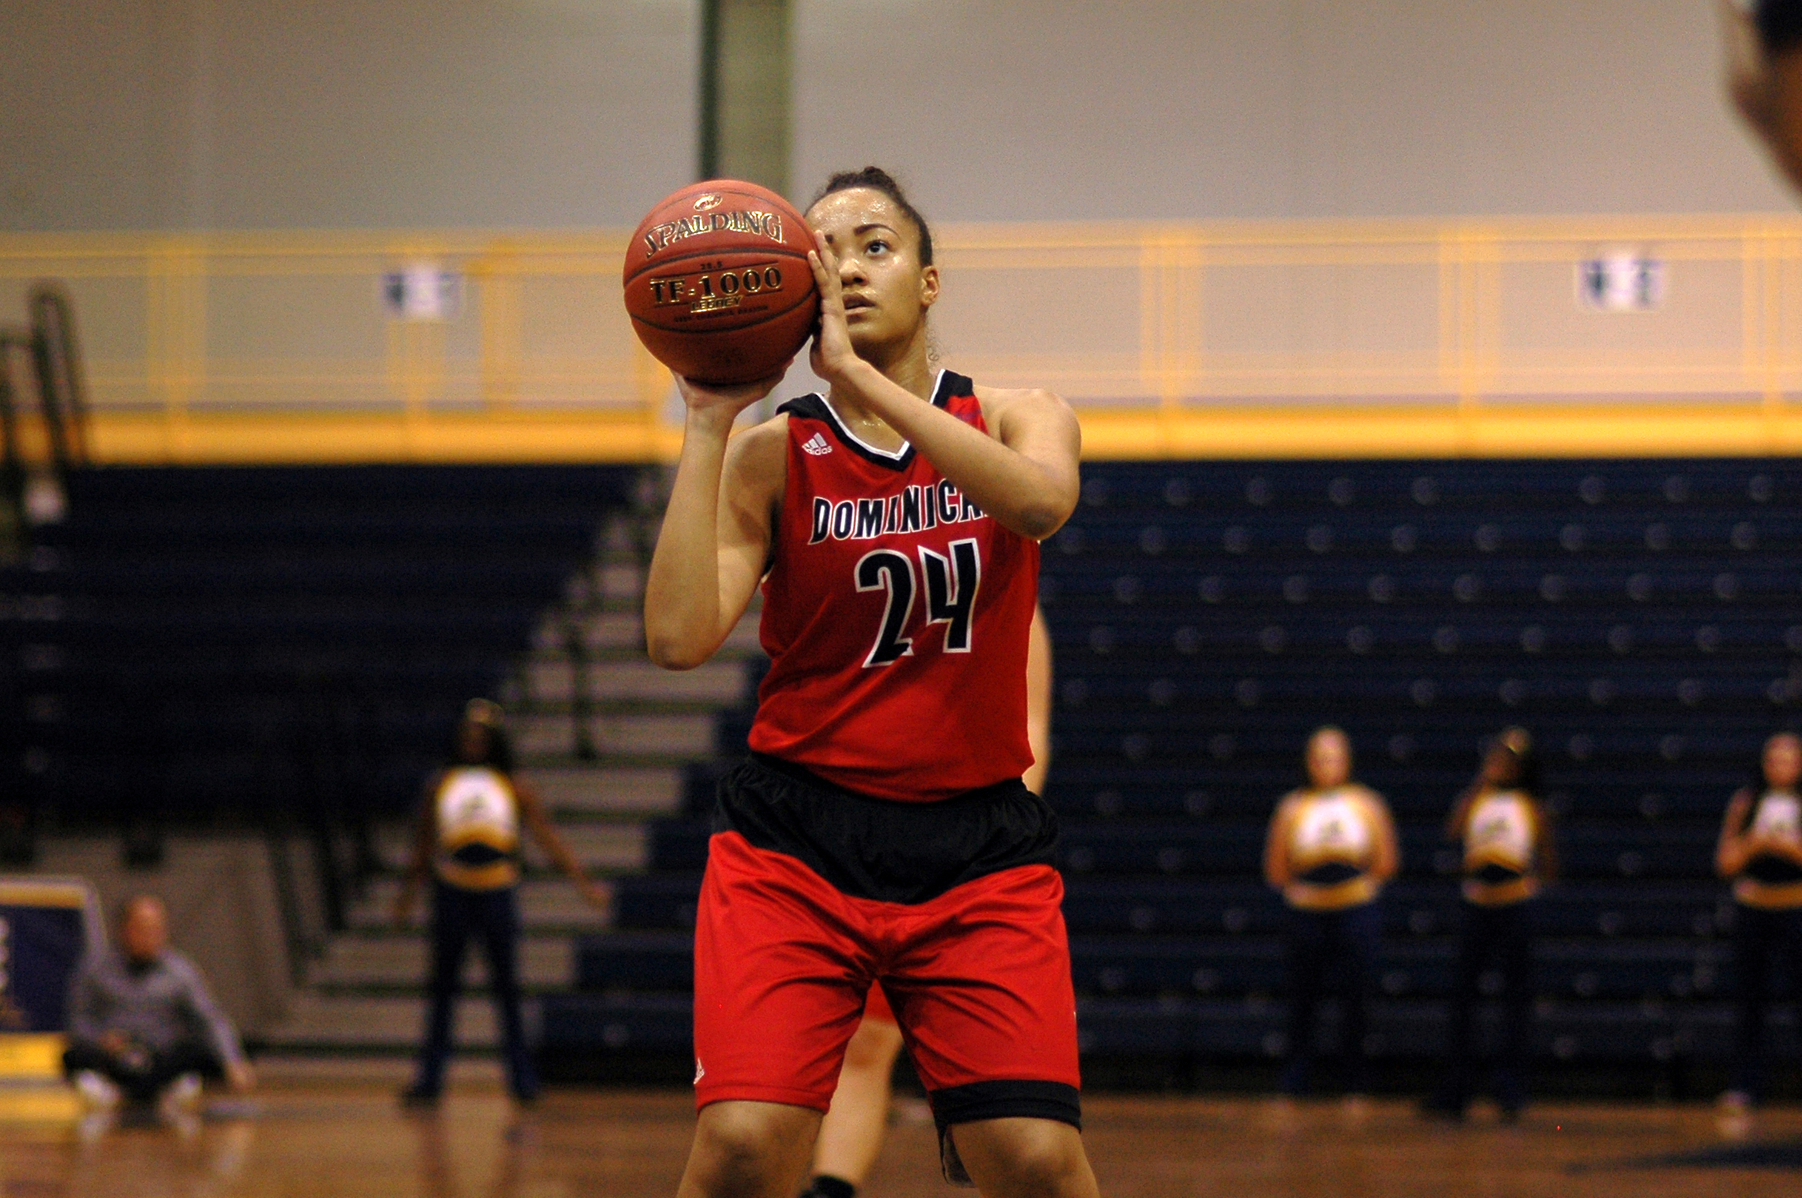 LADY CHARGERS FALL SHORT IN COMEBACK EFFORT VERSUS MERCY COLLEGE